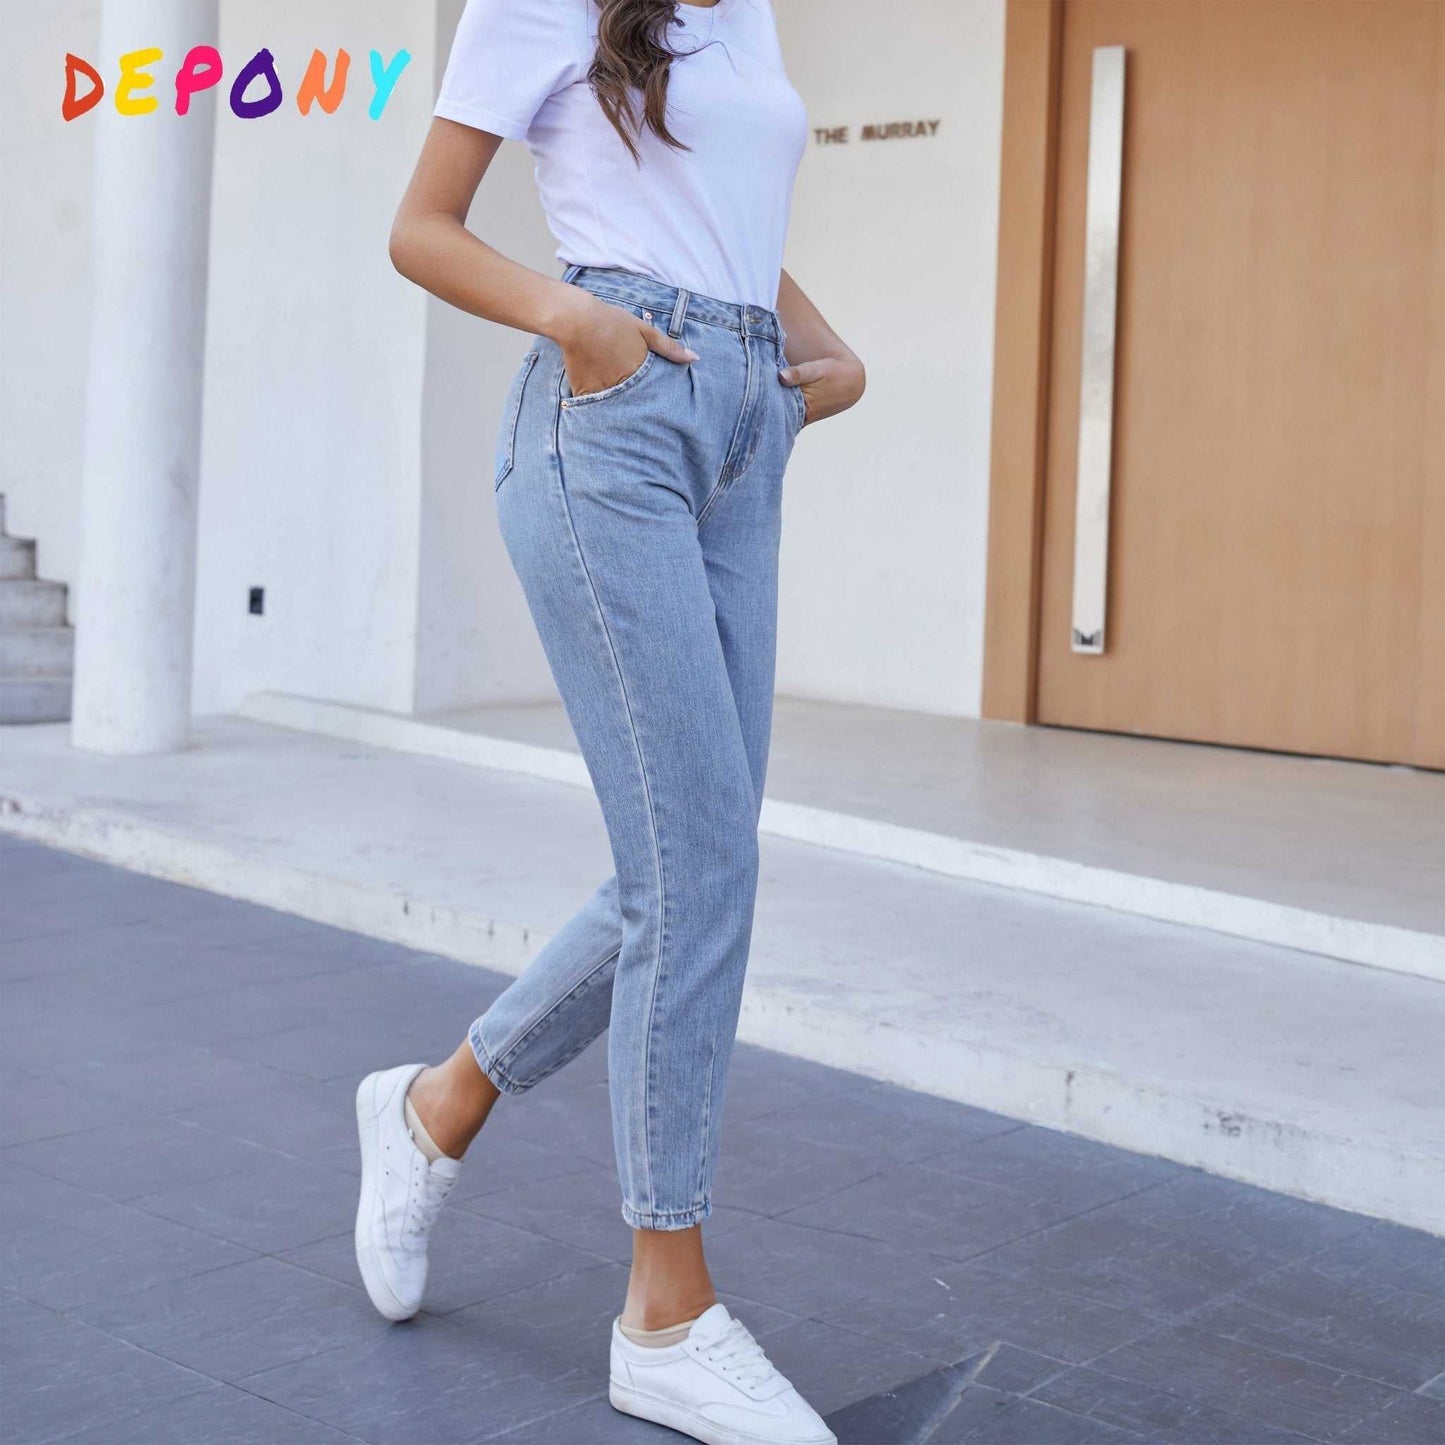 2021 Depony High Waist  Mom Jeans Straight Jeans Femme 100% Cotton